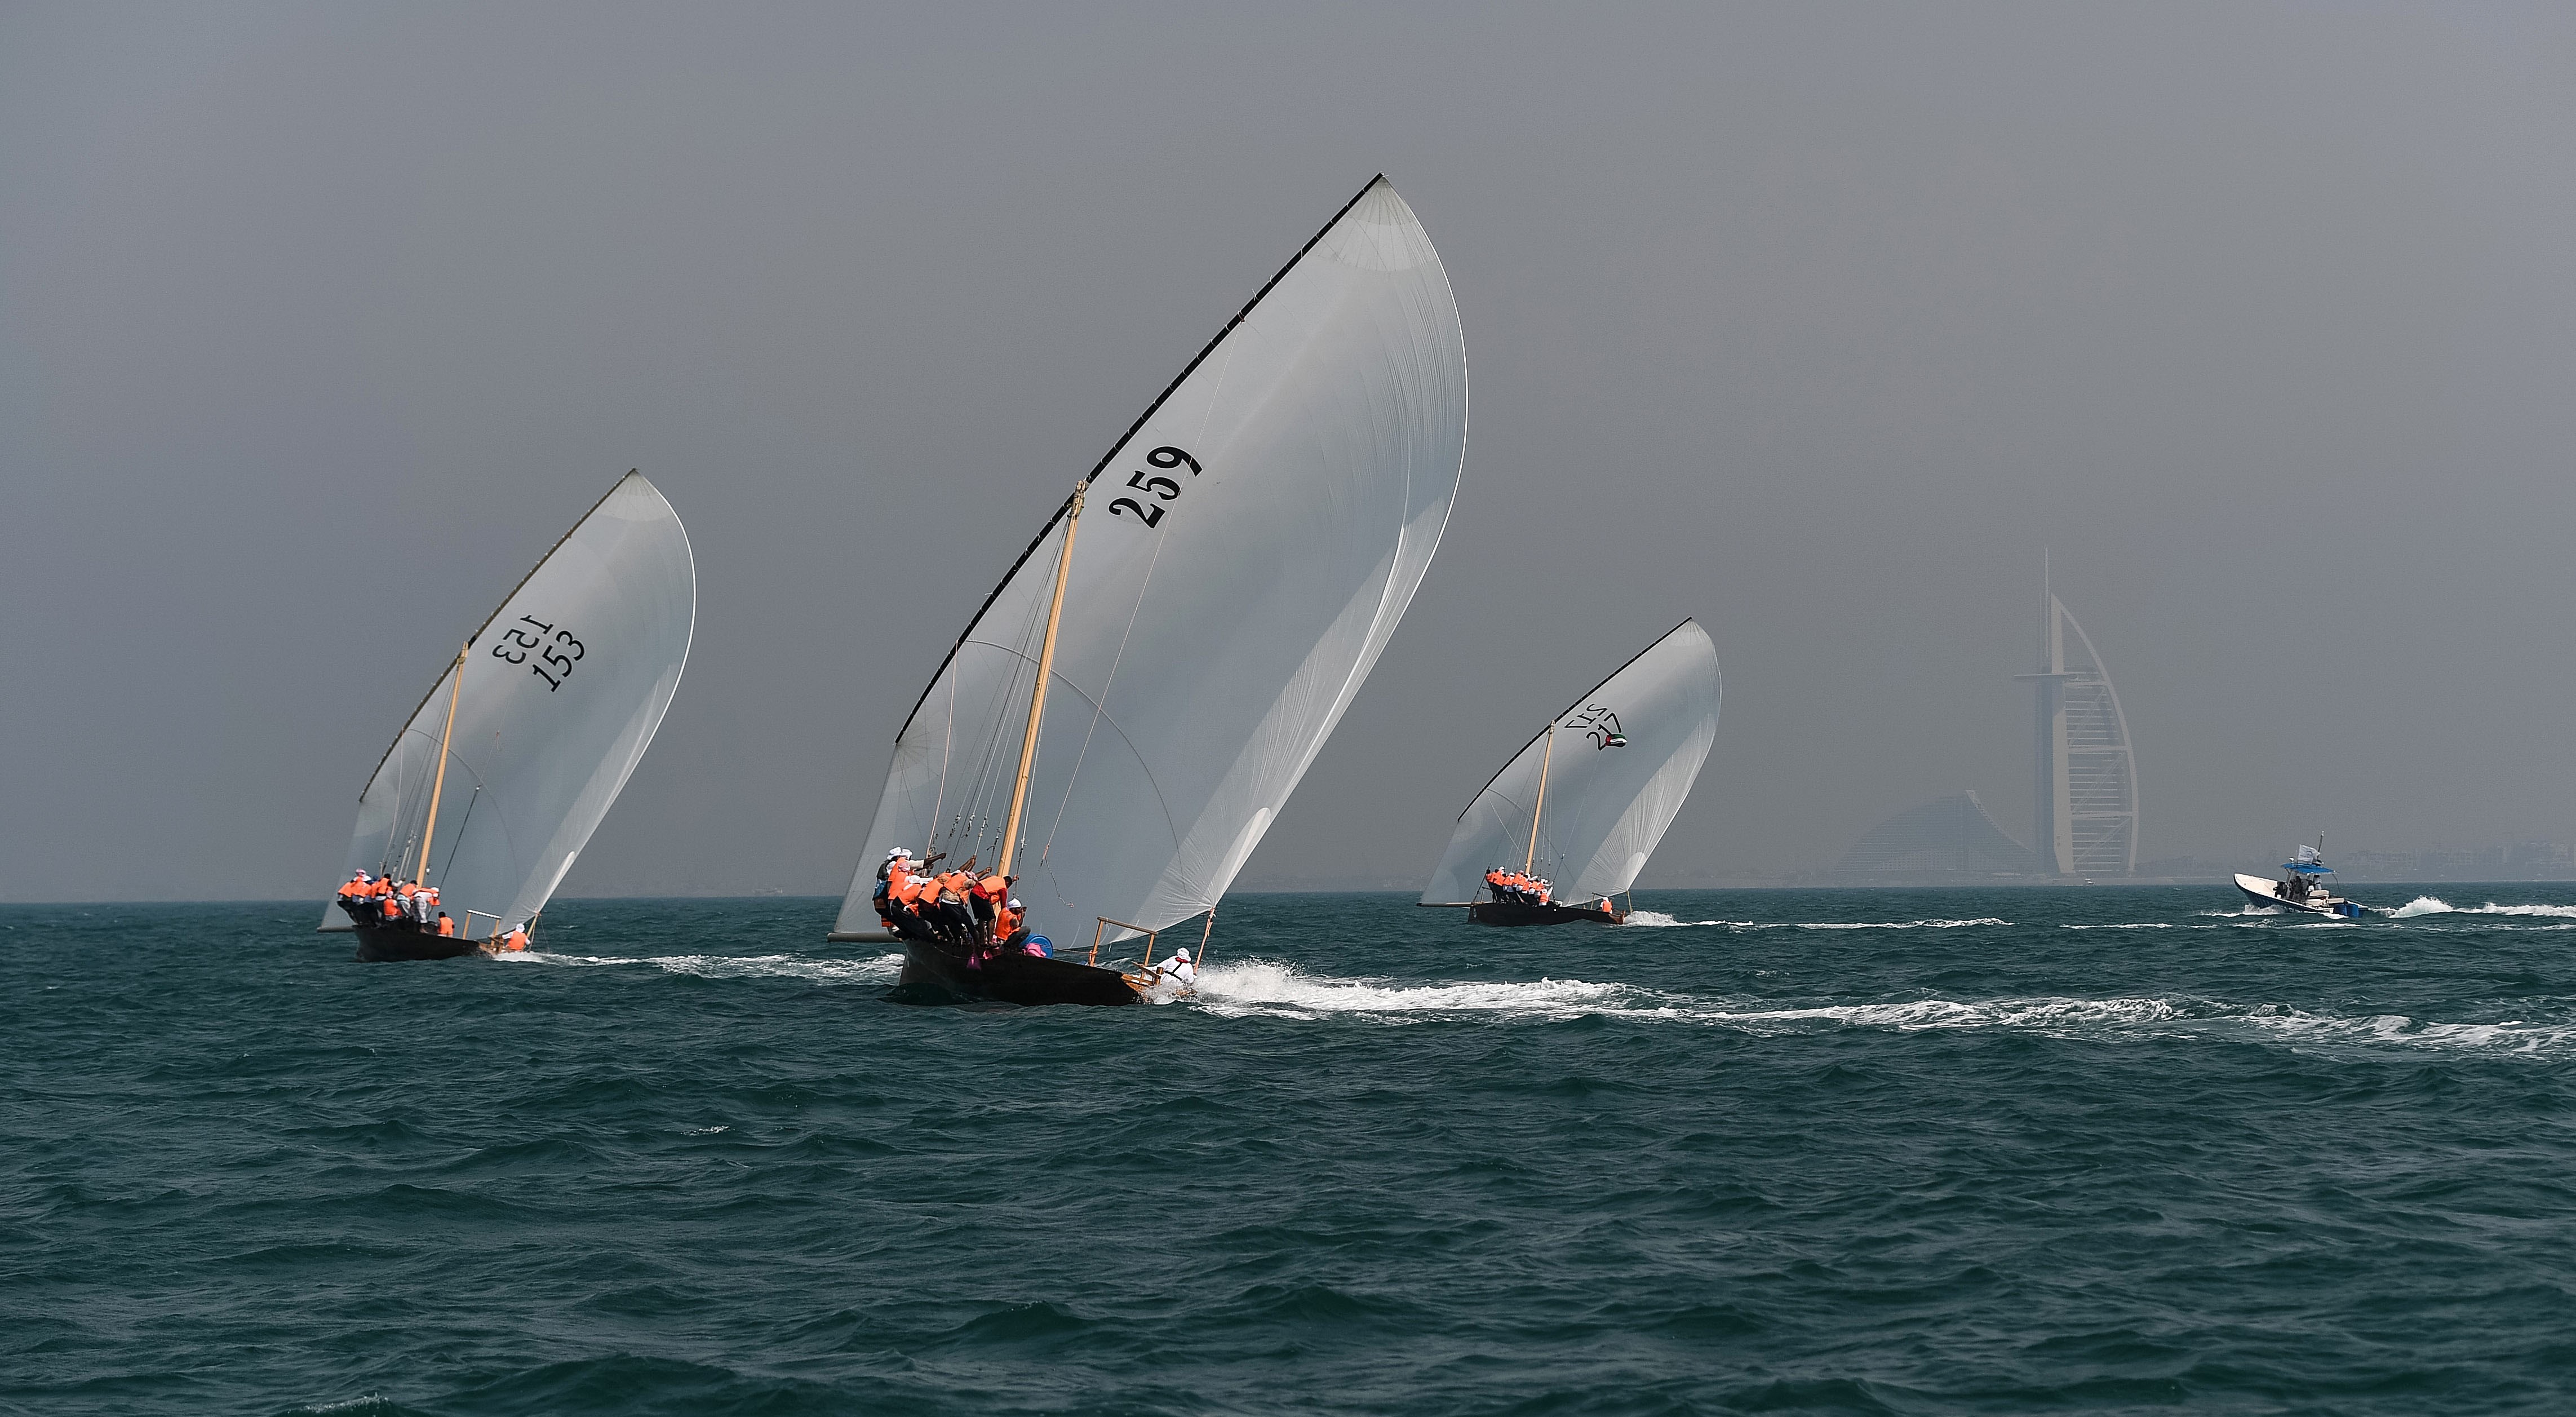 80 Boats to Compete for the Title in the 43ft Dubai Traditional Dhow Sailing Race Today